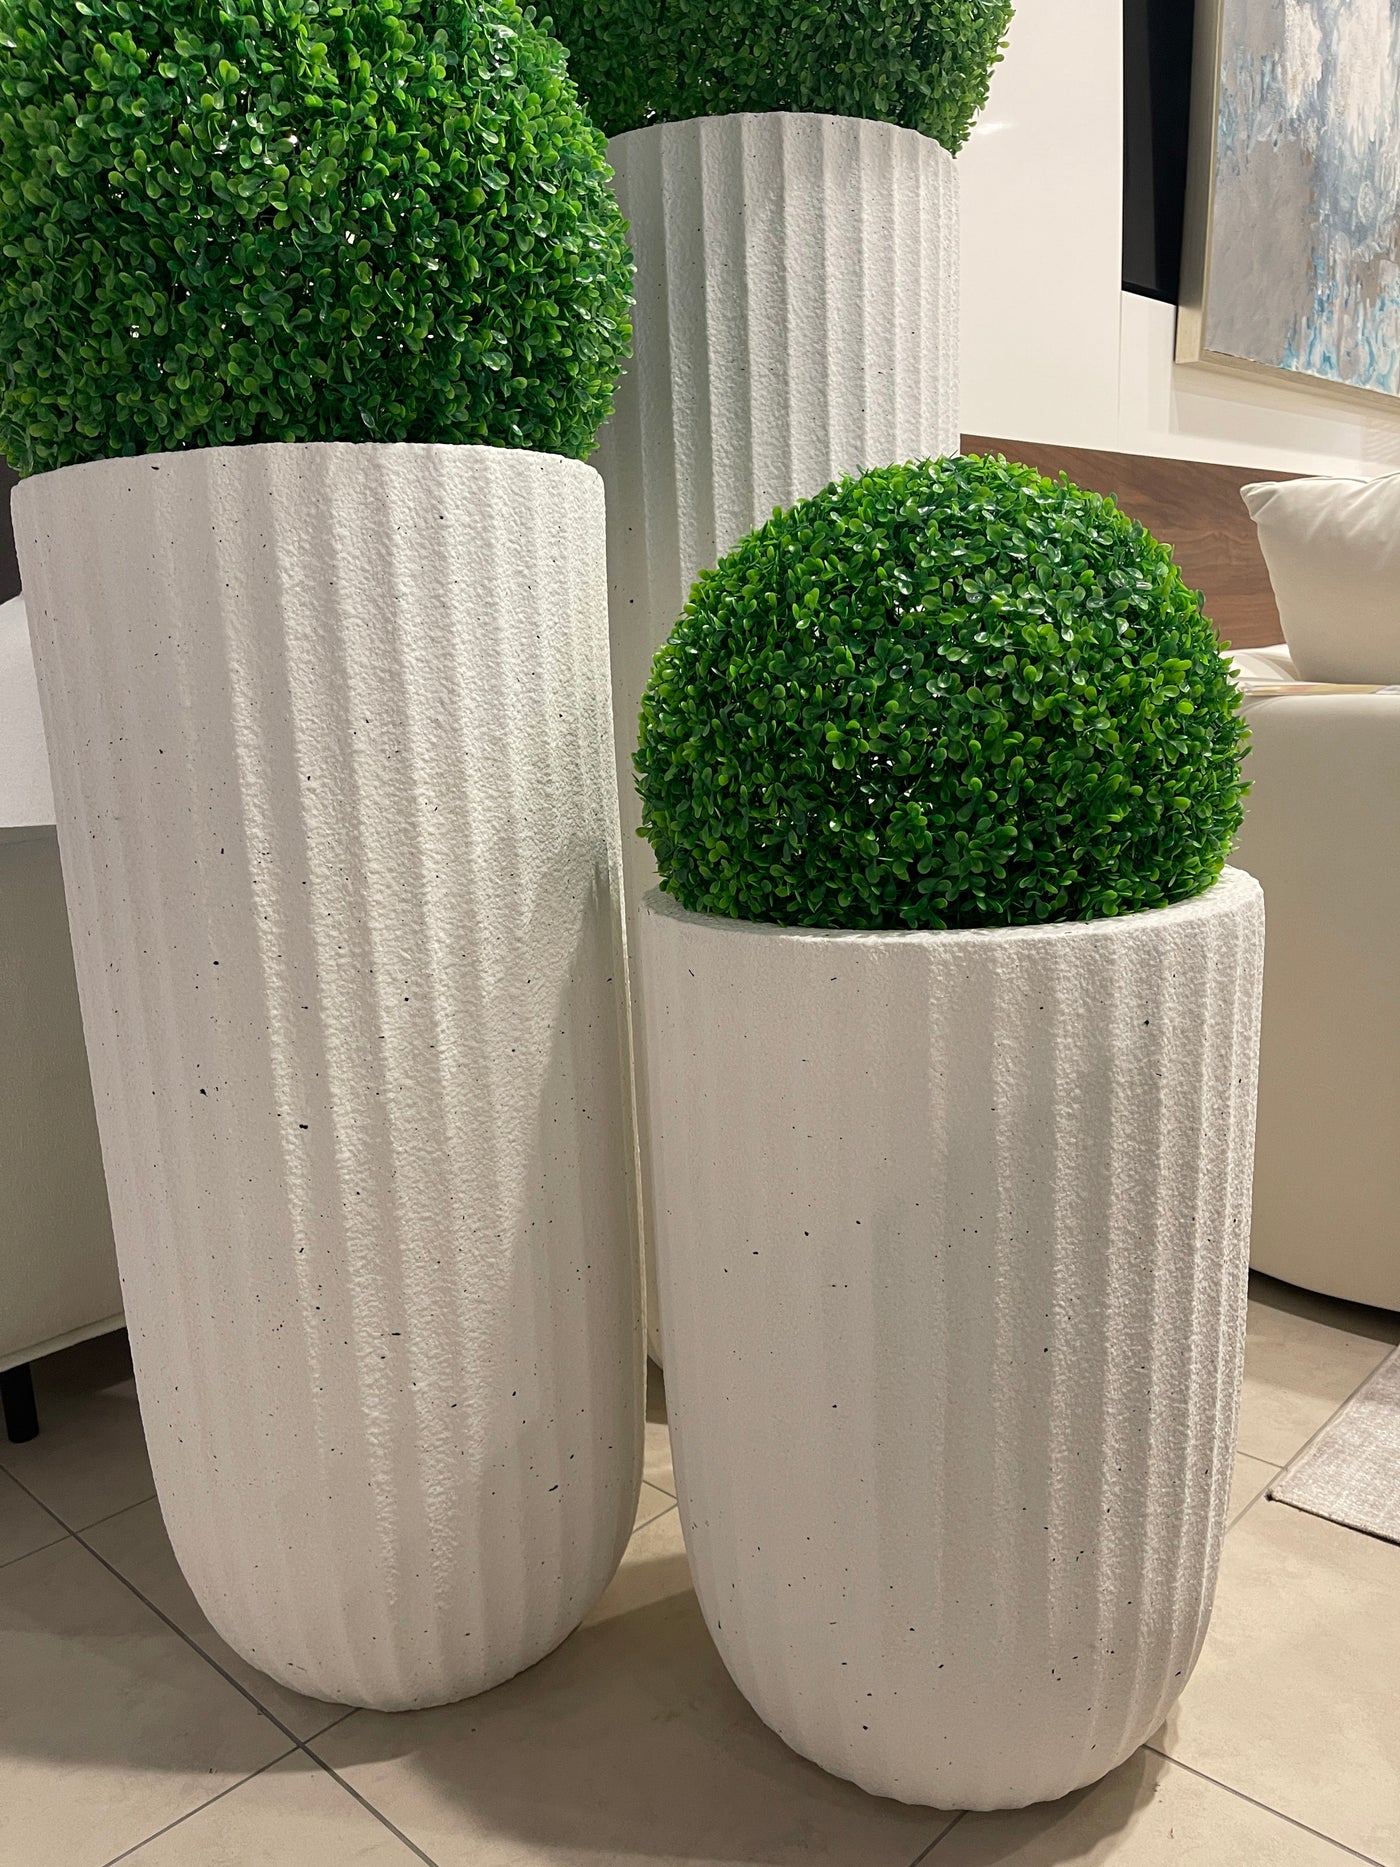 Textured Planter with Stripes